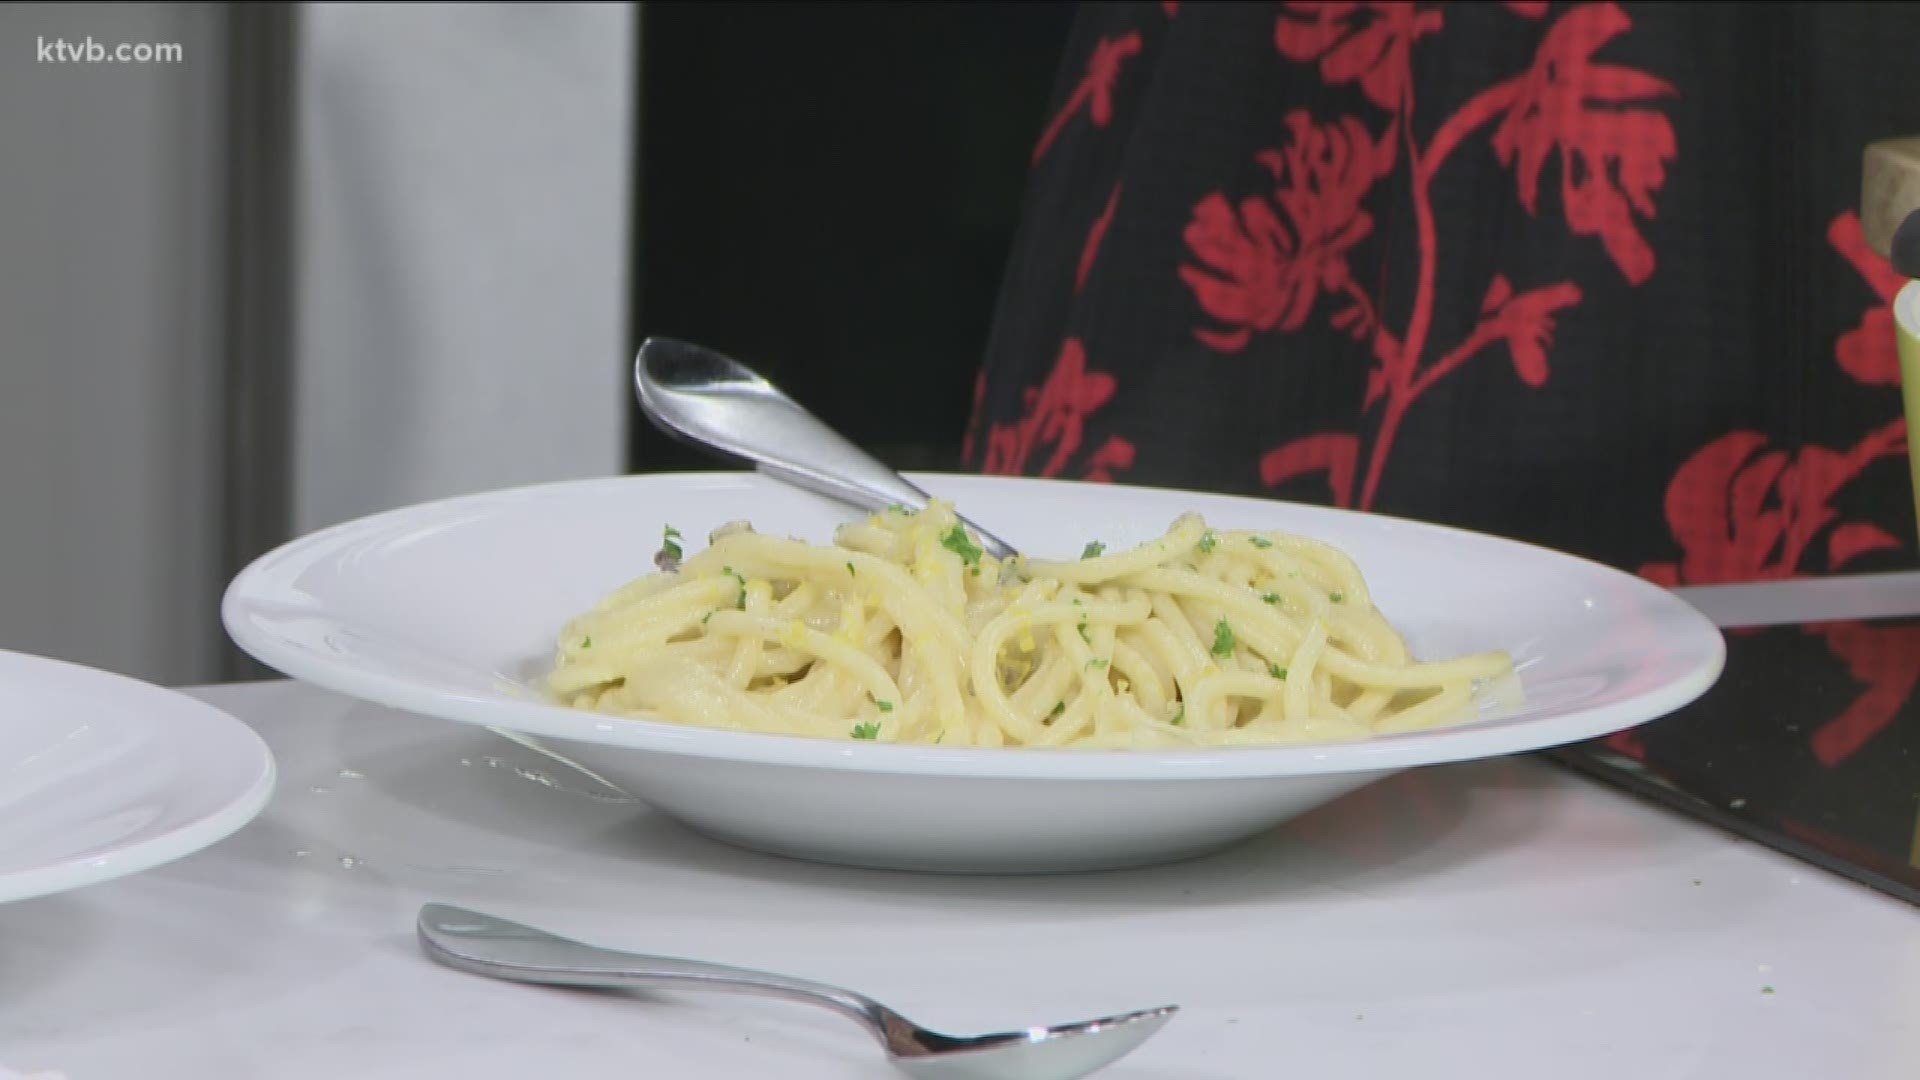 Chef Mark Maselli stops by the KTVB Kitchen to show us how to make this delicious pasta dish. You can also enjoy it for breakfast!